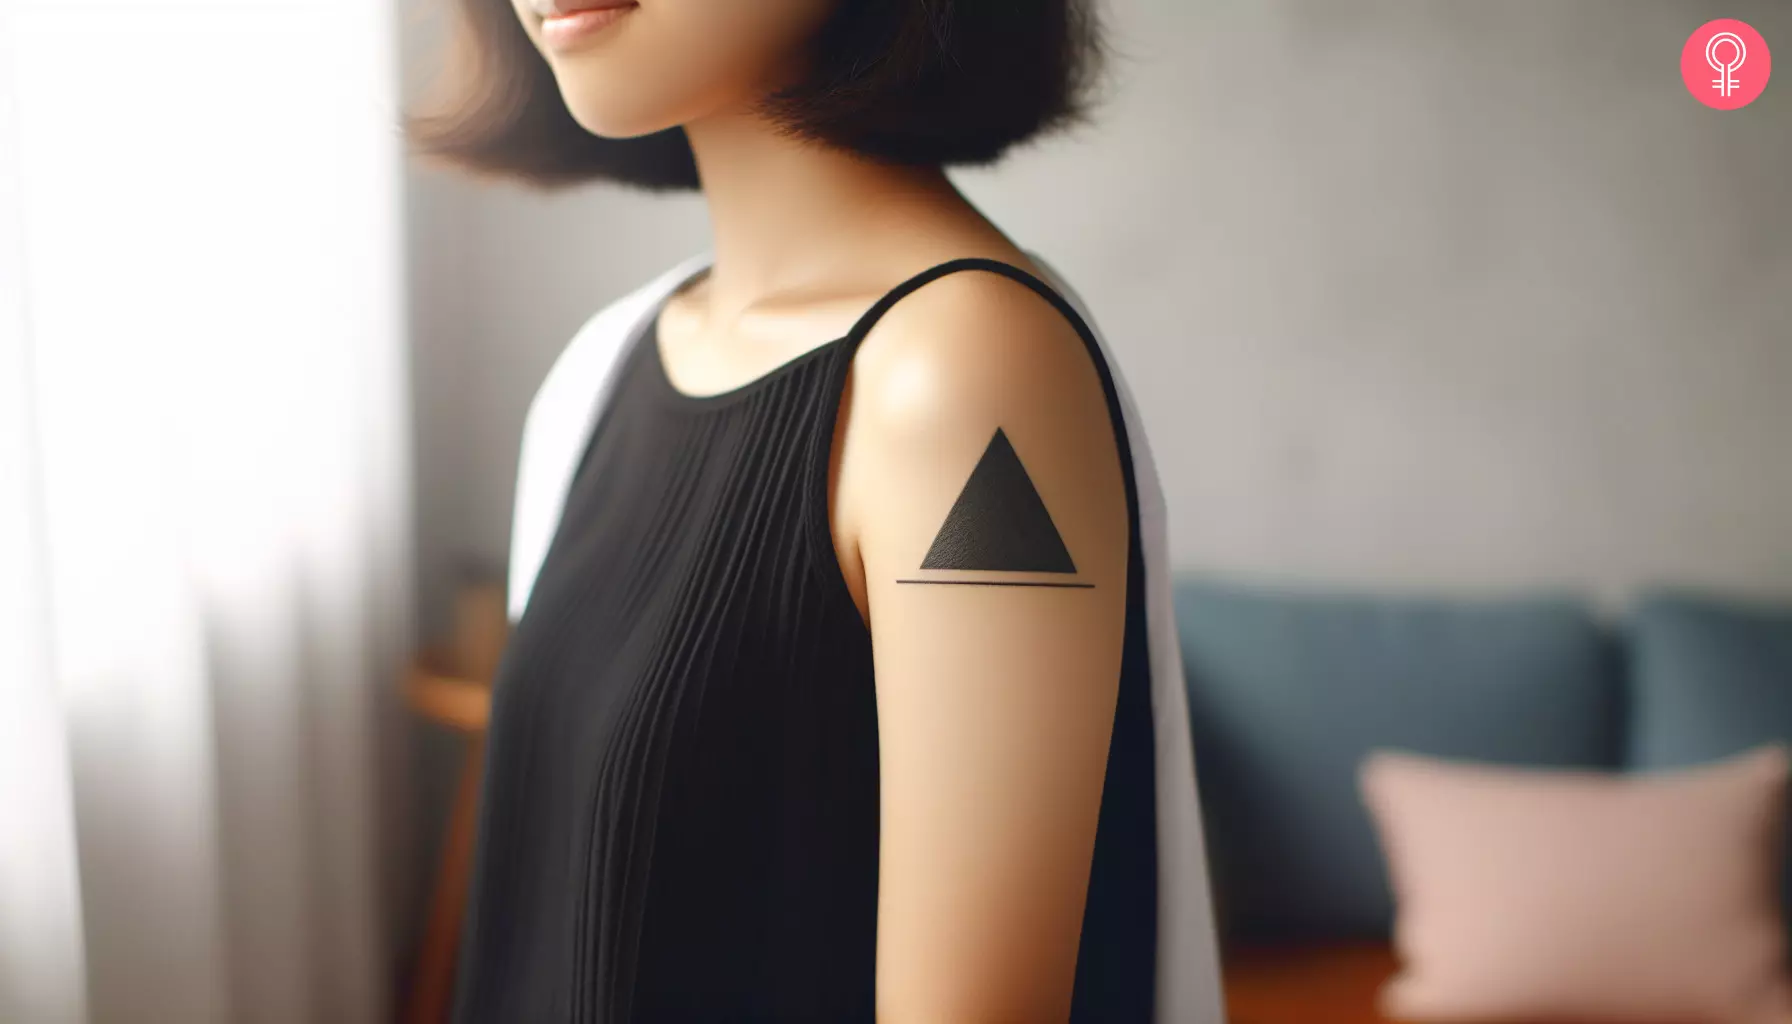 A woman with a black triangle tattoo on her upper arm